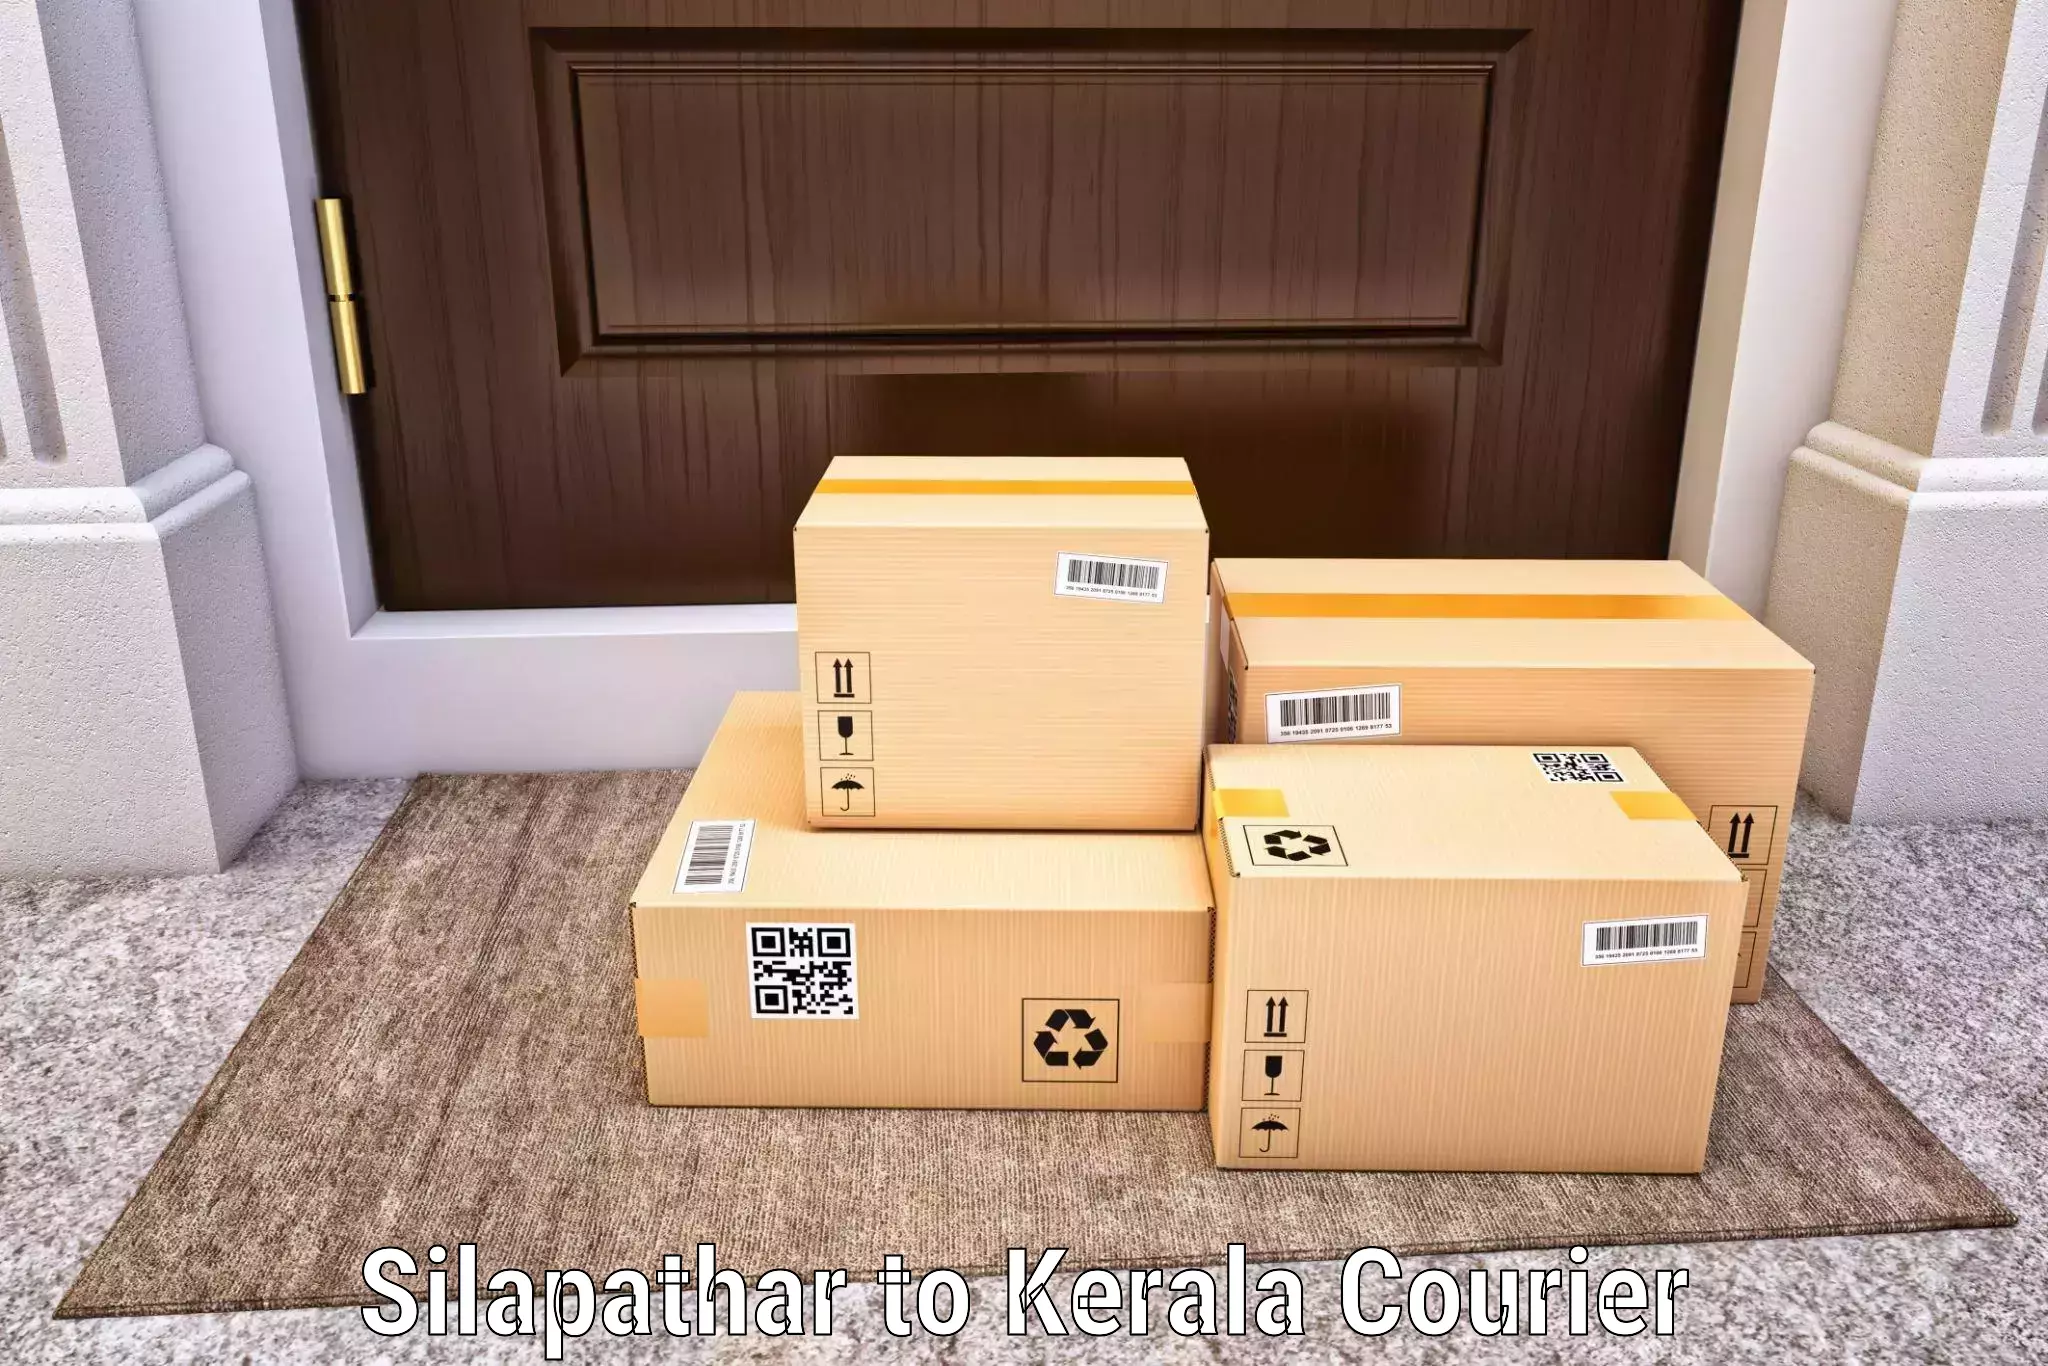 Supply chain delivery Silapathar to Adimali